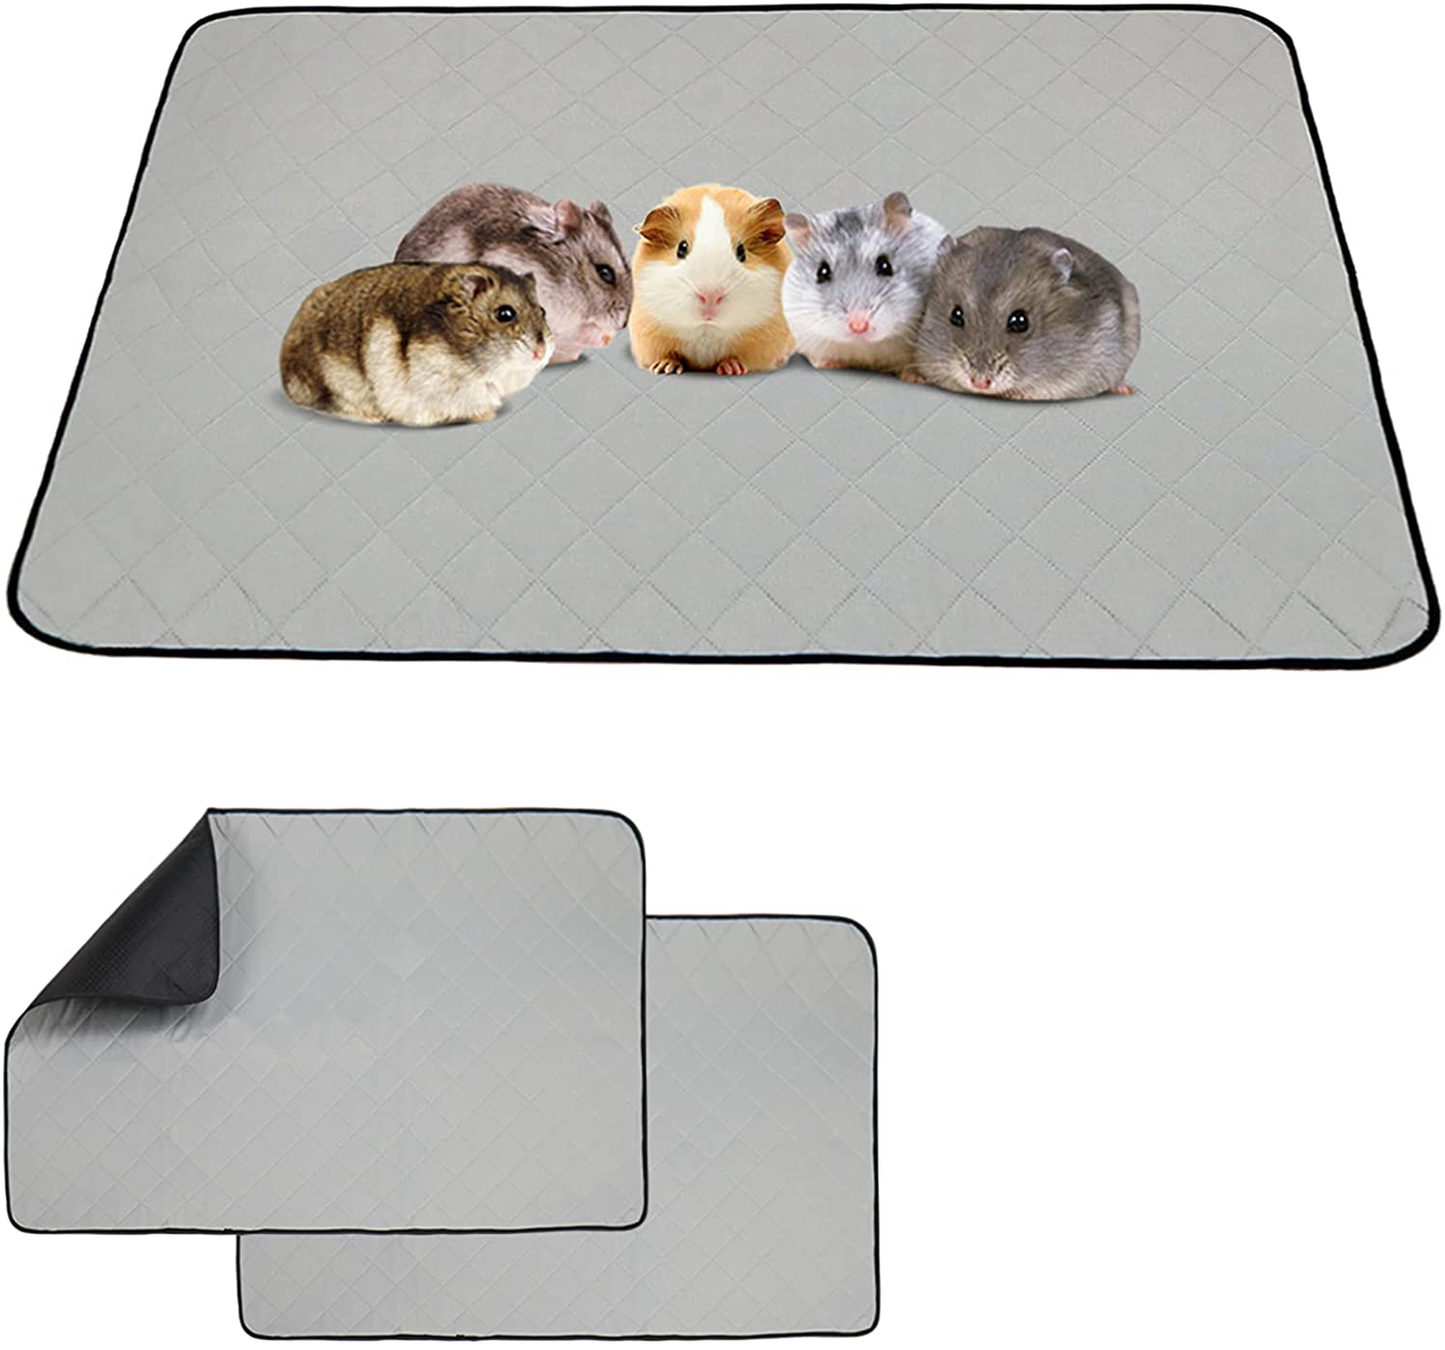 Guinea Pig Cage Liners, 2 Pack Guinea Pig Pee Pads Super Absorbent & Washable, Guinea Pig Bedding anti Slip Bottom, Guinea Pig Cage Accessories for for Small Animals